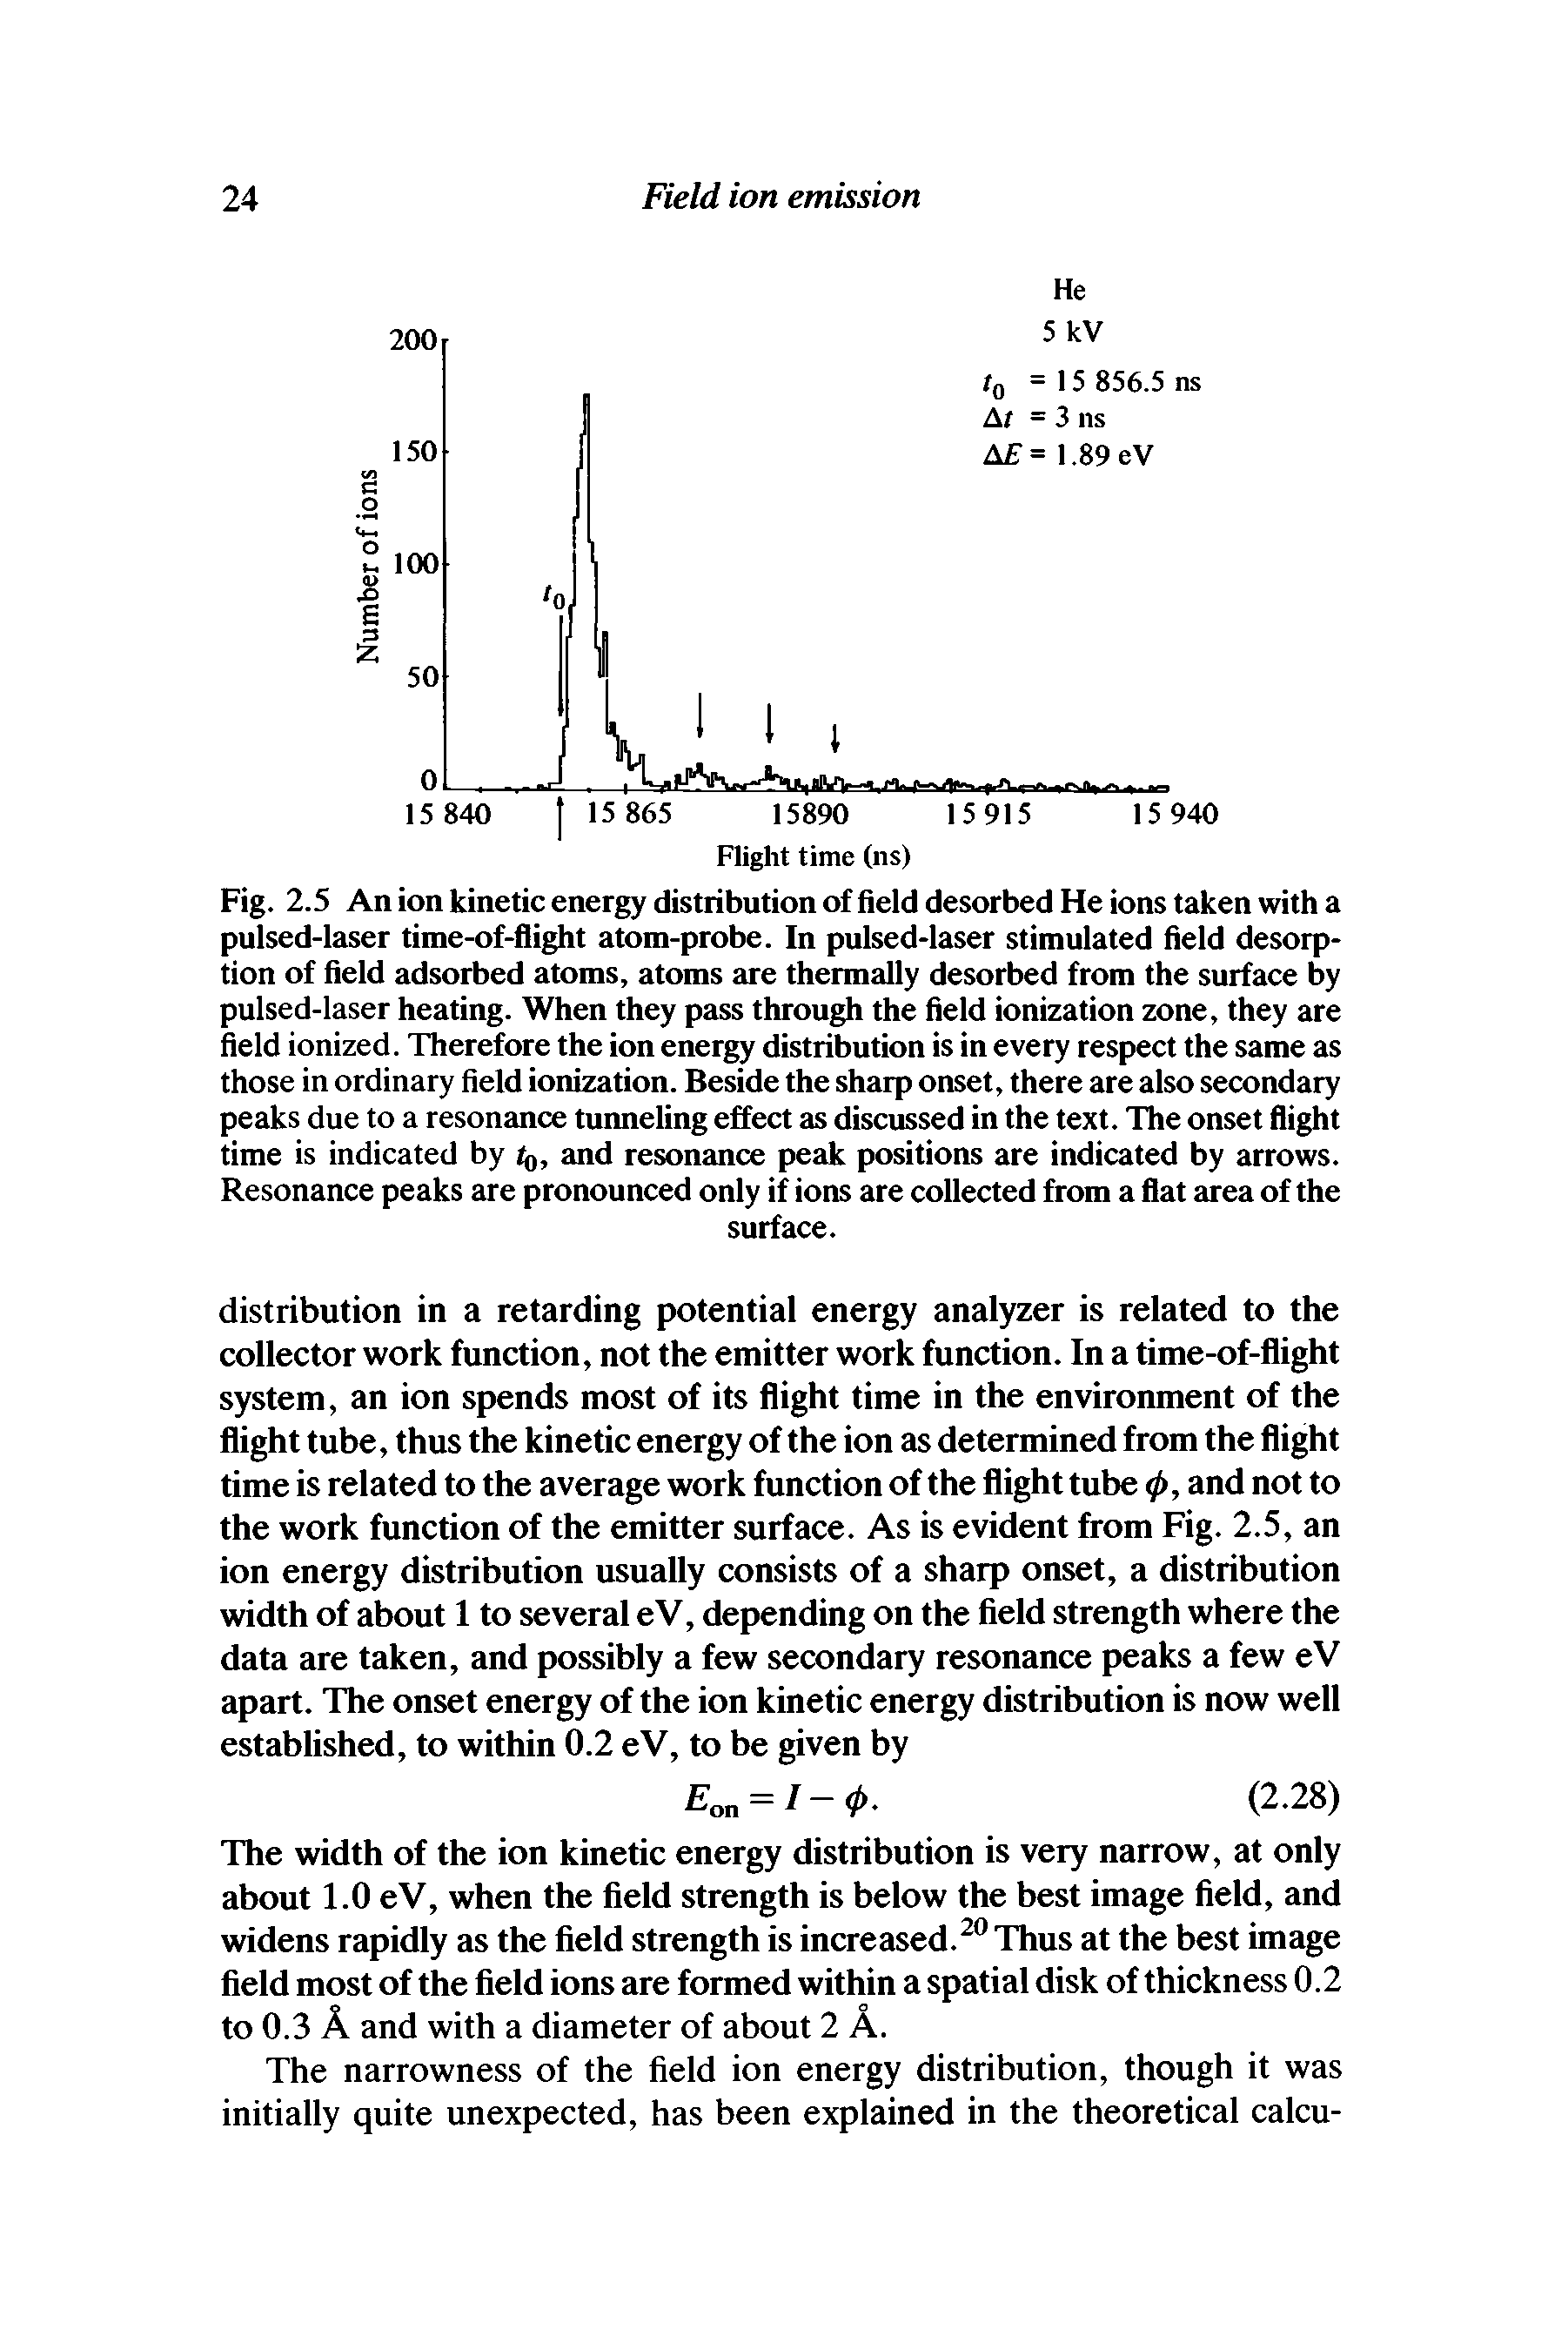 Fig. 2.5 An ion kinetic energy distribution of field desorbed He ions taken with a pulsed-laser time-of-flight atom-probe. In pulsed-laser stimulated field desorption of field adsorbed atoms, atoms are thermally desorbed from the surface by pulsed-laser heating. When they pass through the field ionization zone, they are field ionized. Therefore the ion energy distribution is in every respect the same as those in ordinary field ionization. Beside the sharp onset, there are also secondary peaks due to a resonance tunneling effect as discussed in the text. The onset flight time is indicated by to, and resonance peak positions are indicated by arrows. Resonance peaks are pronounced only if ions are collected from a flat area of the...